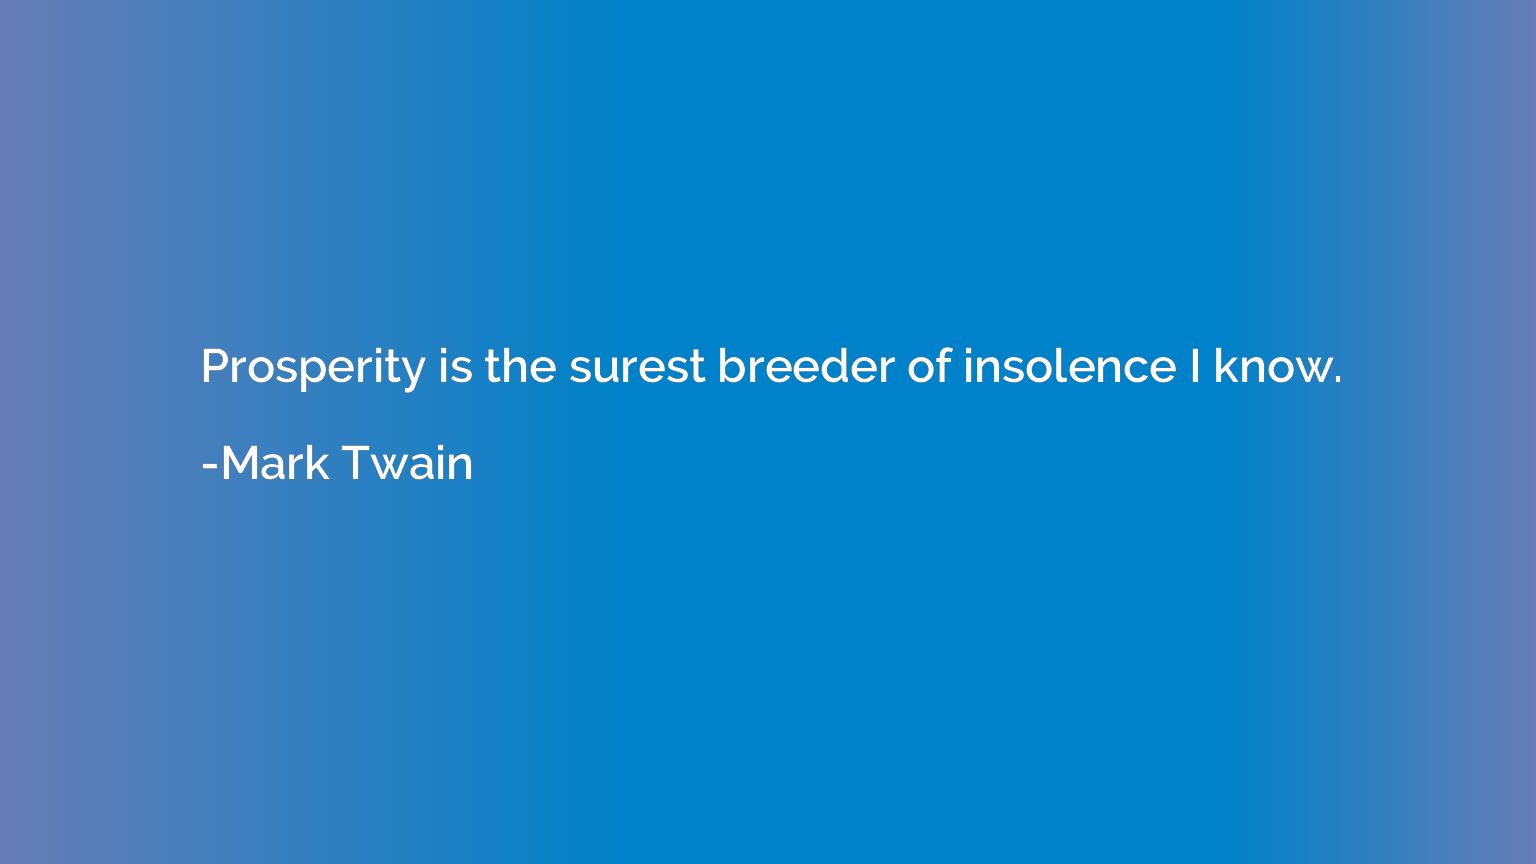 Prosperity is the surest breeder of insolence I know.